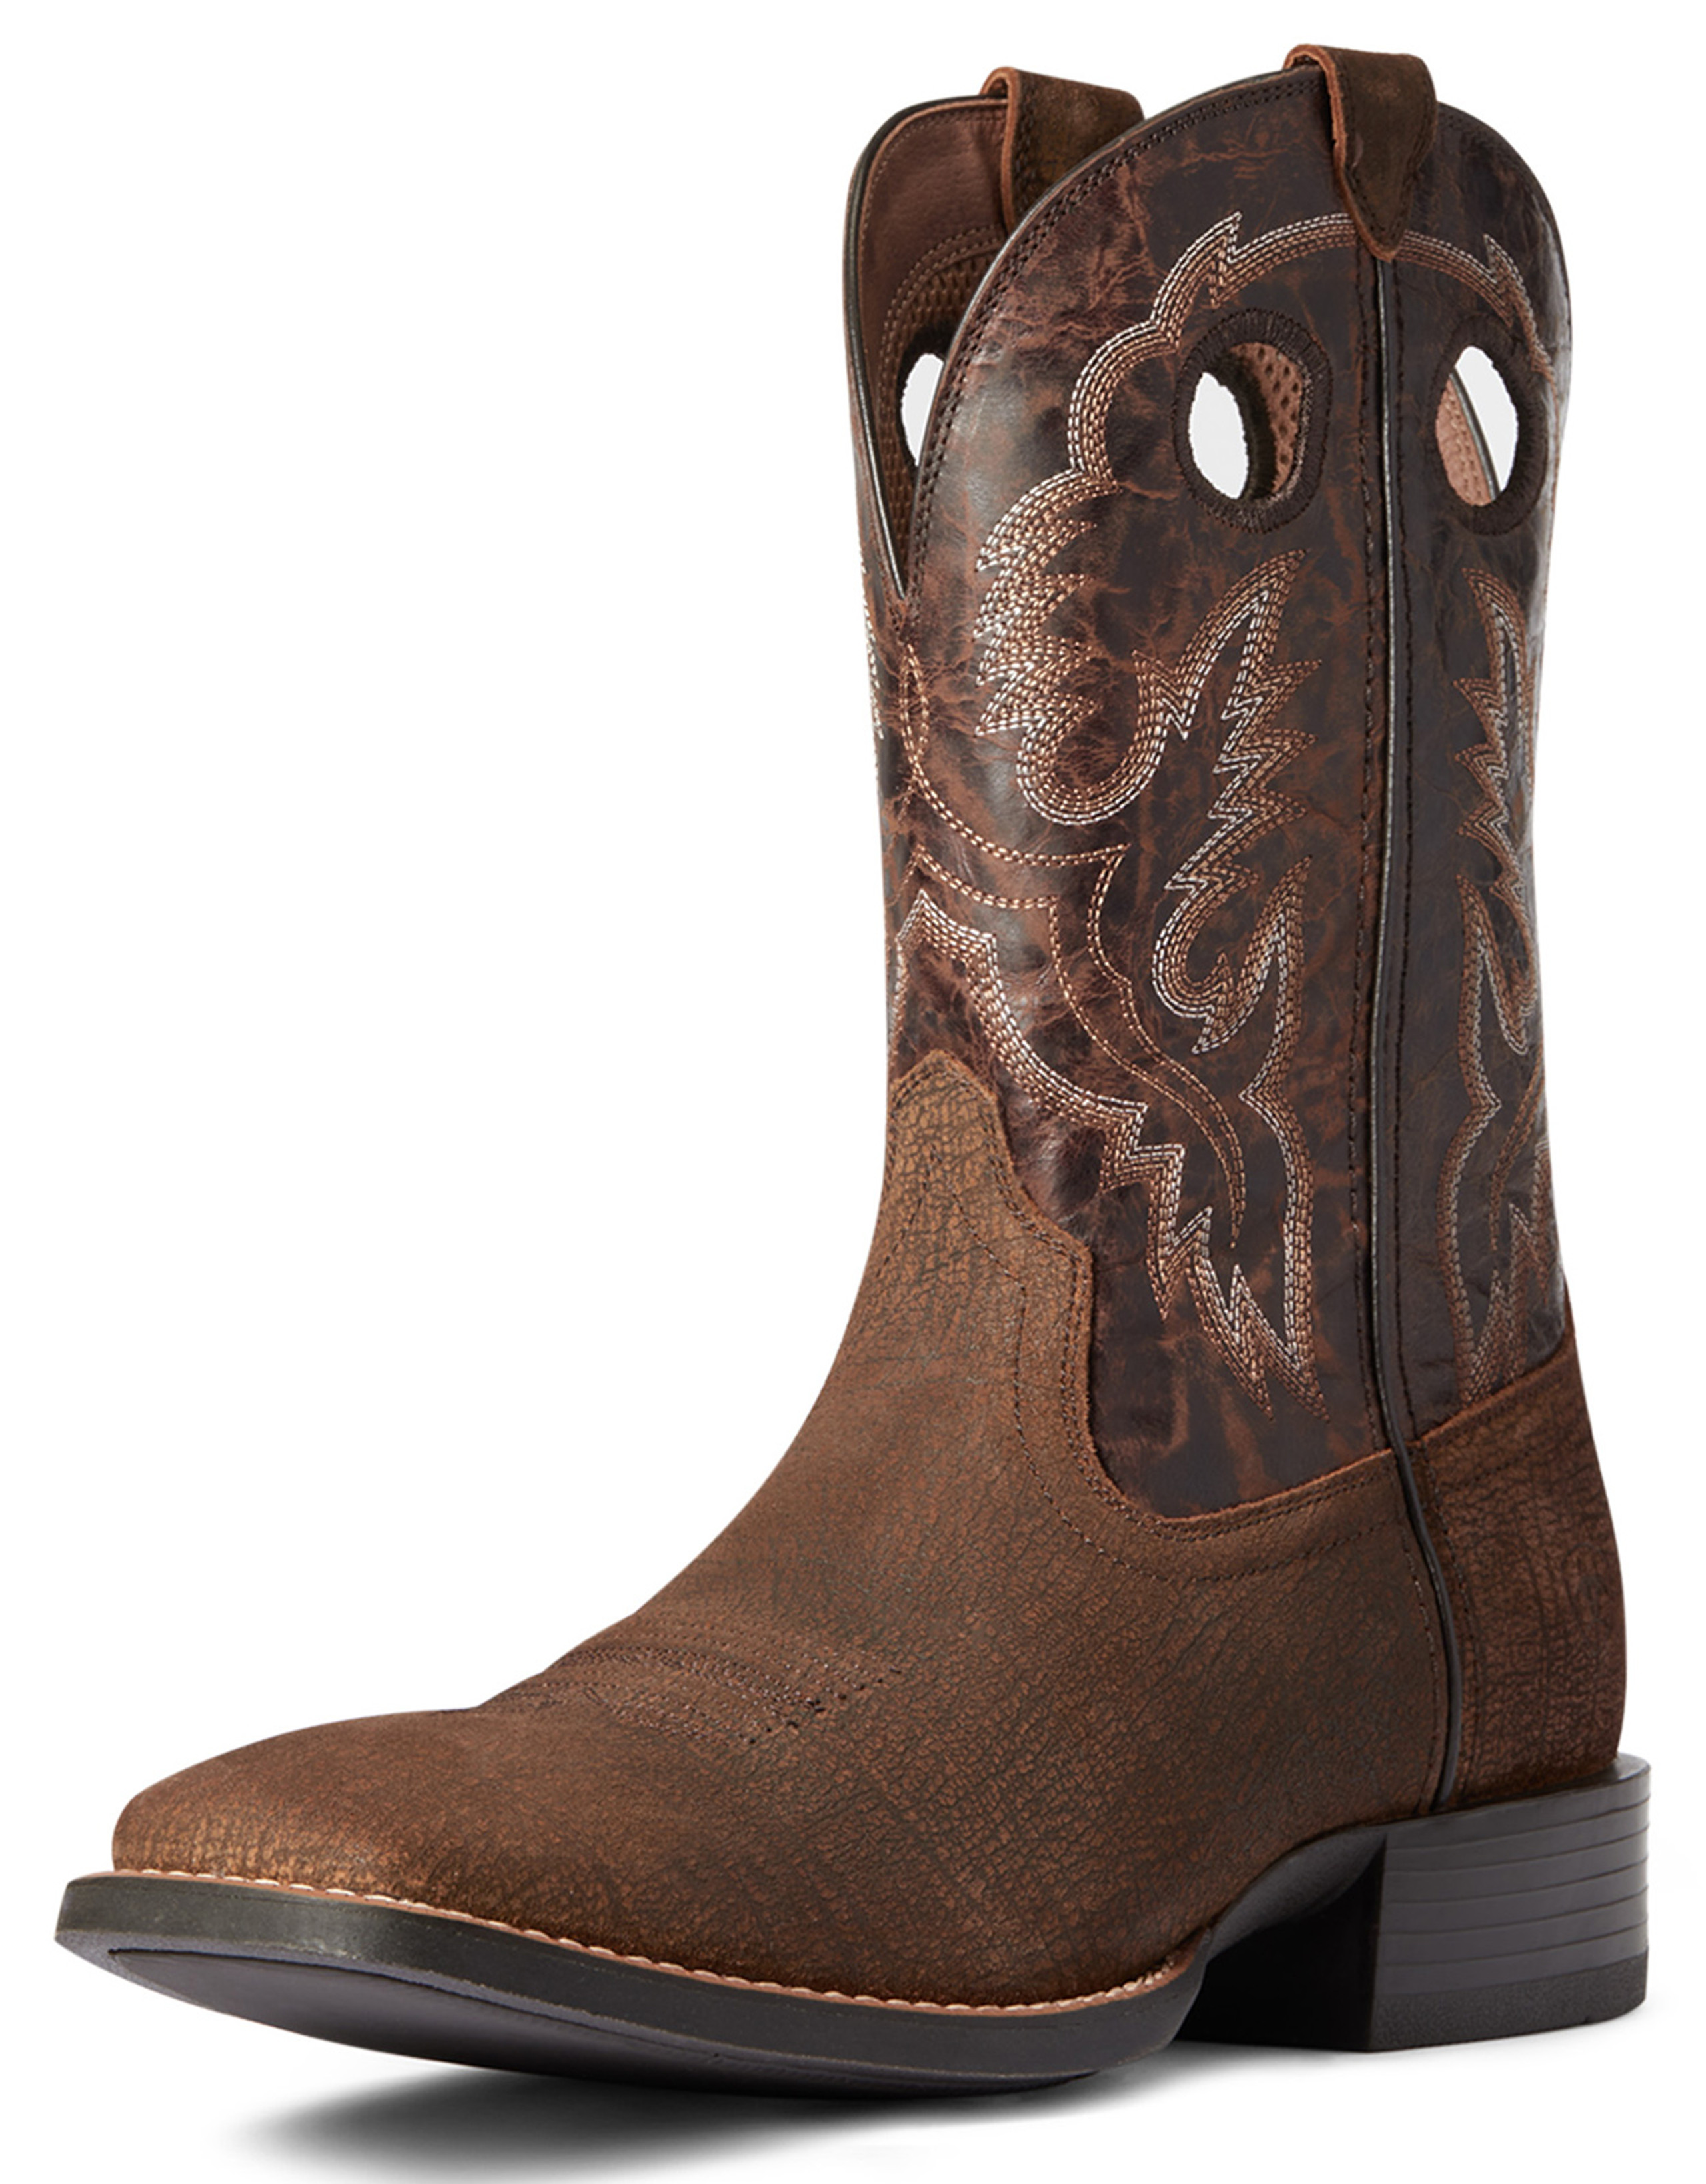 Ariat International - Boots, Clothing & Accessories